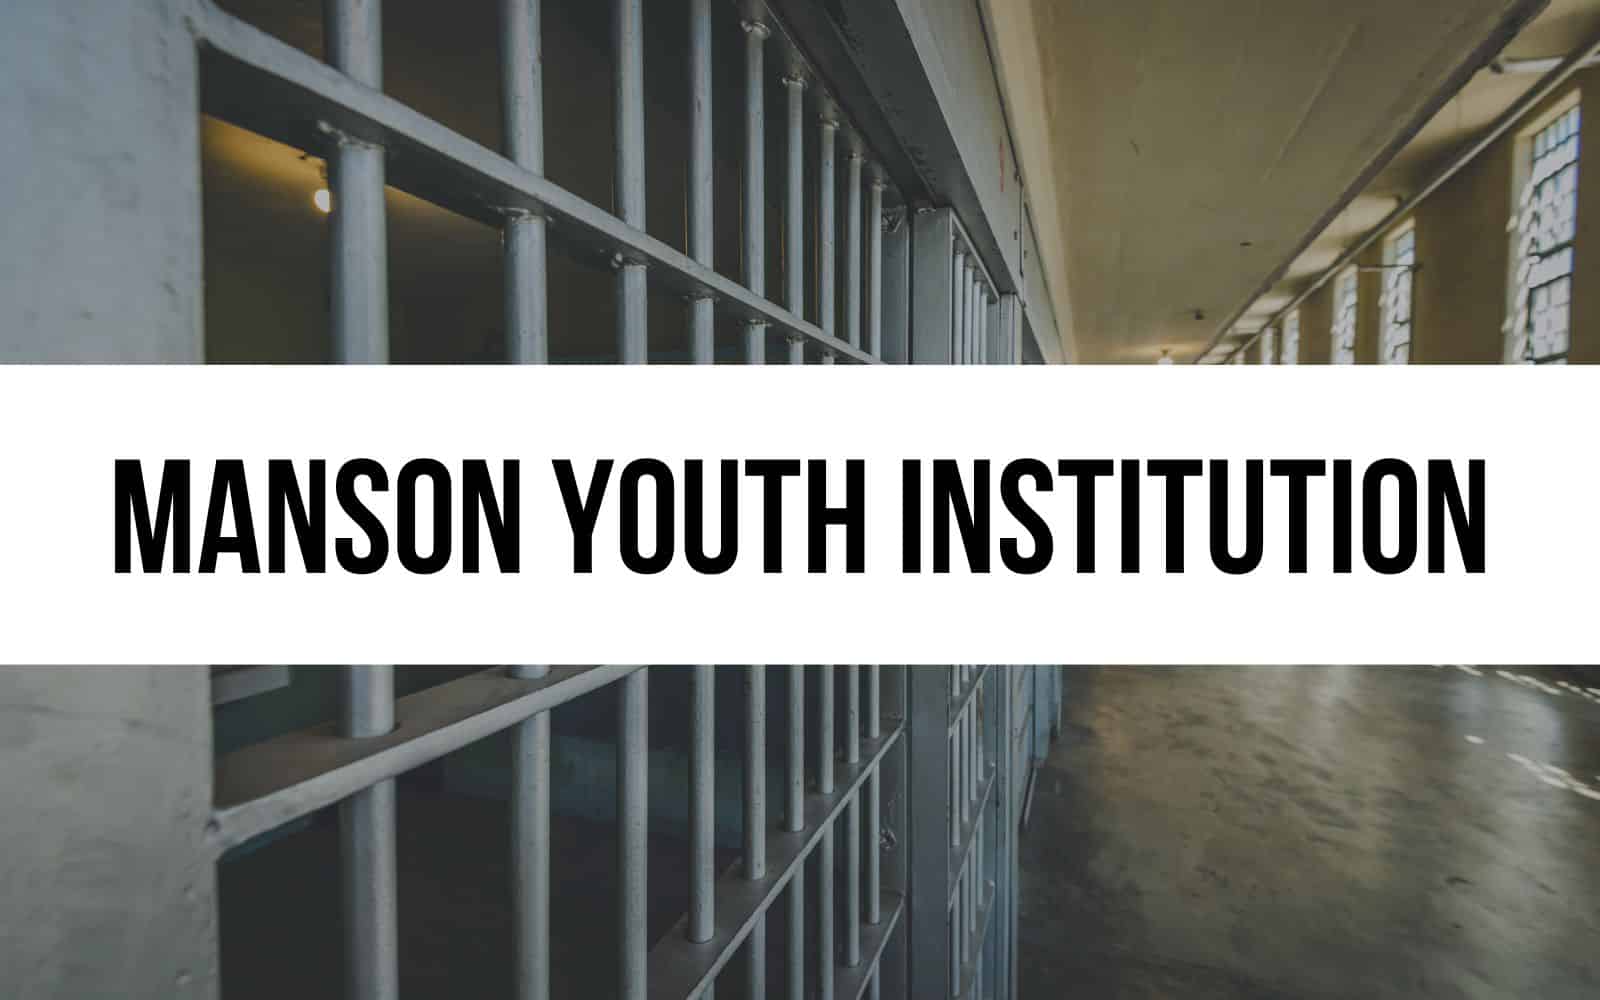 Manson Youth Institution